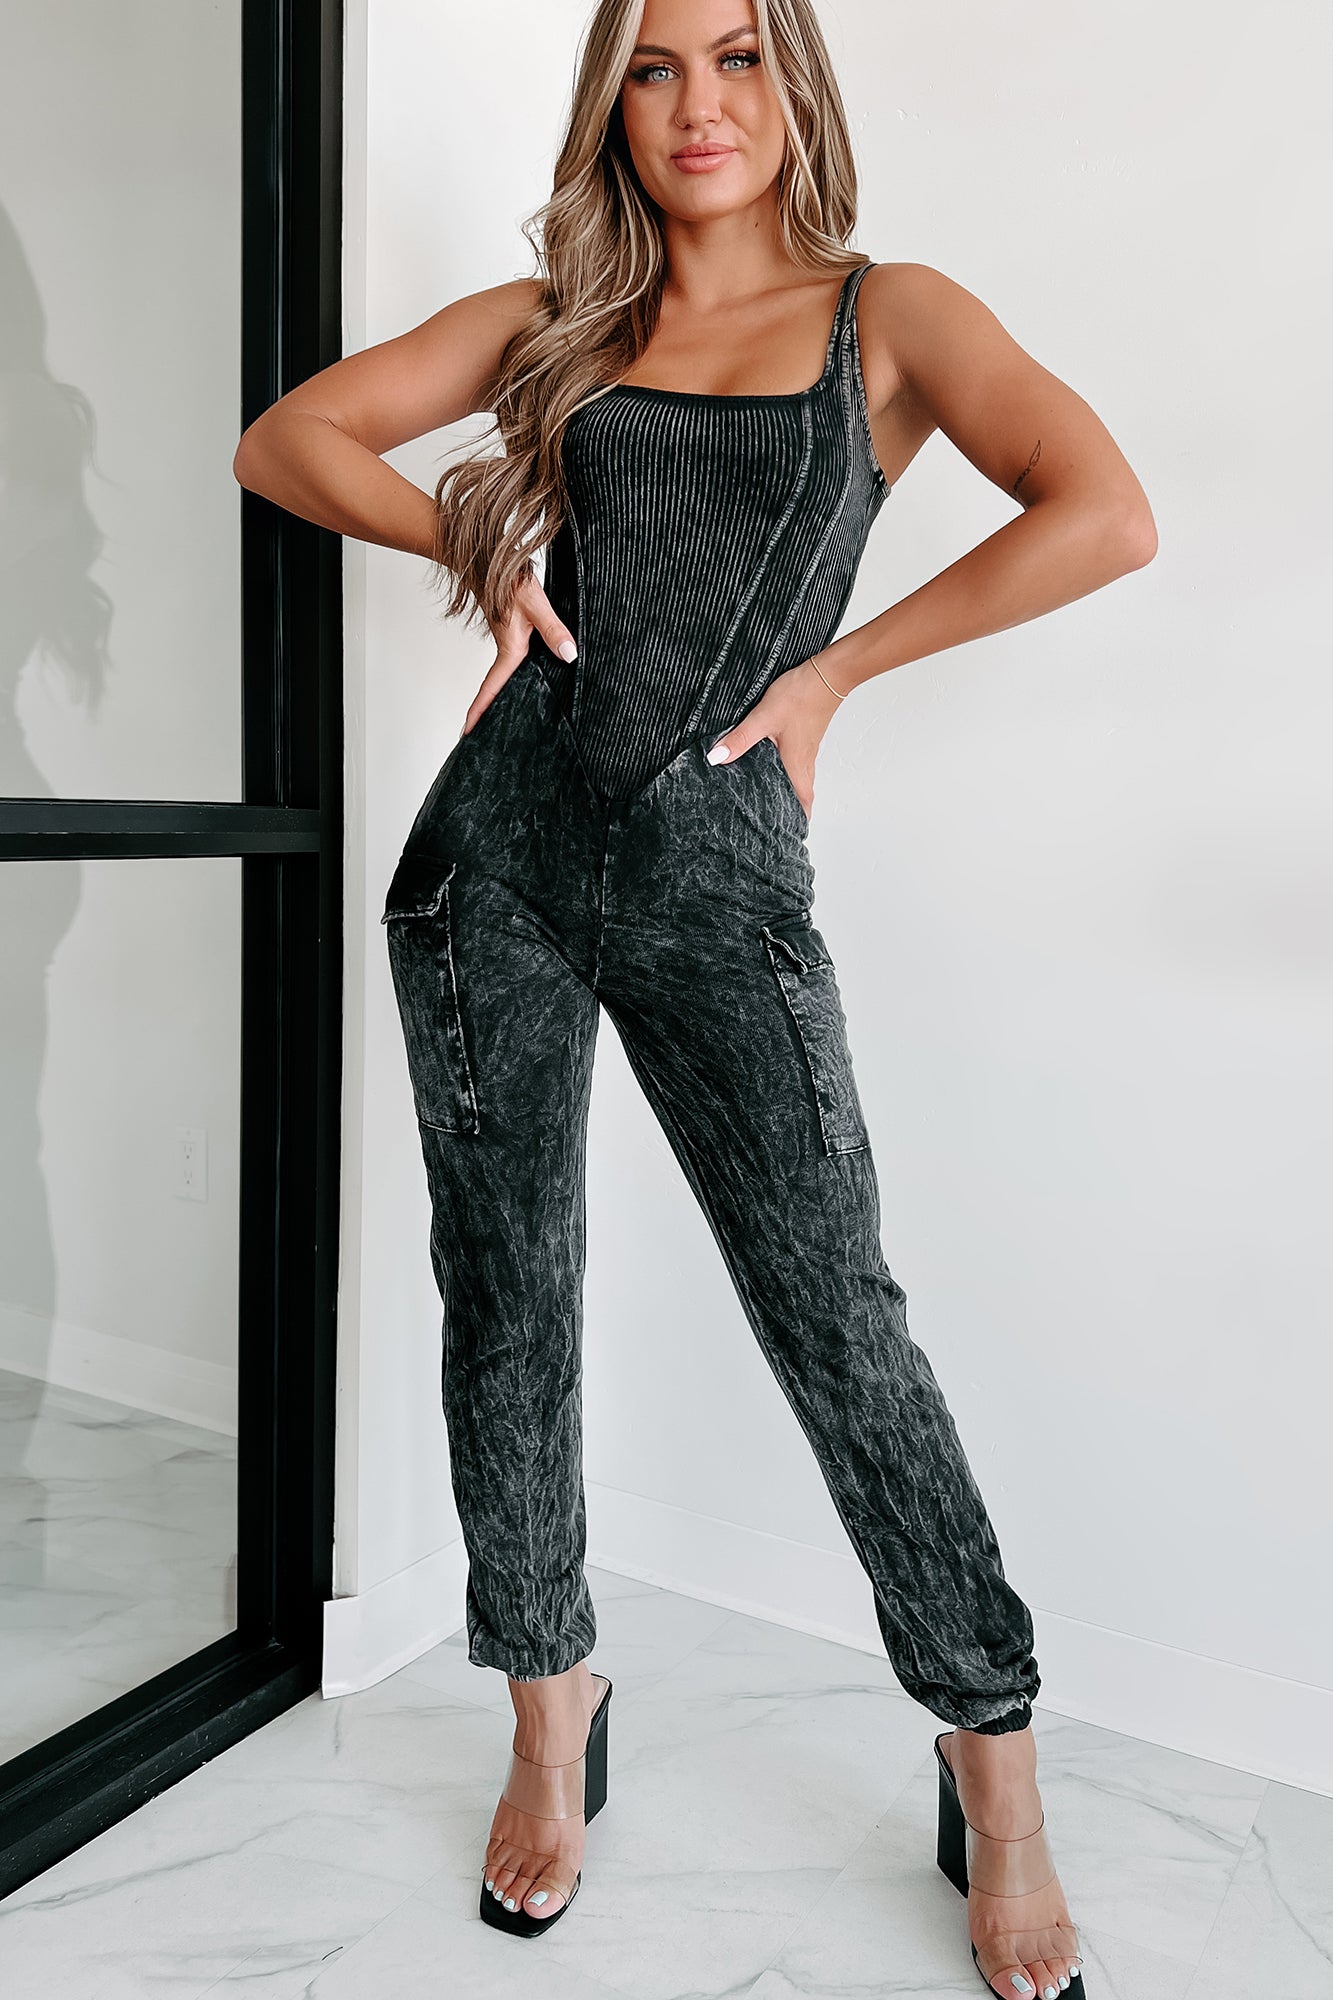 No Issues Here Mineral Wash Cargo Jumpsuit (Black) - NanaMacs